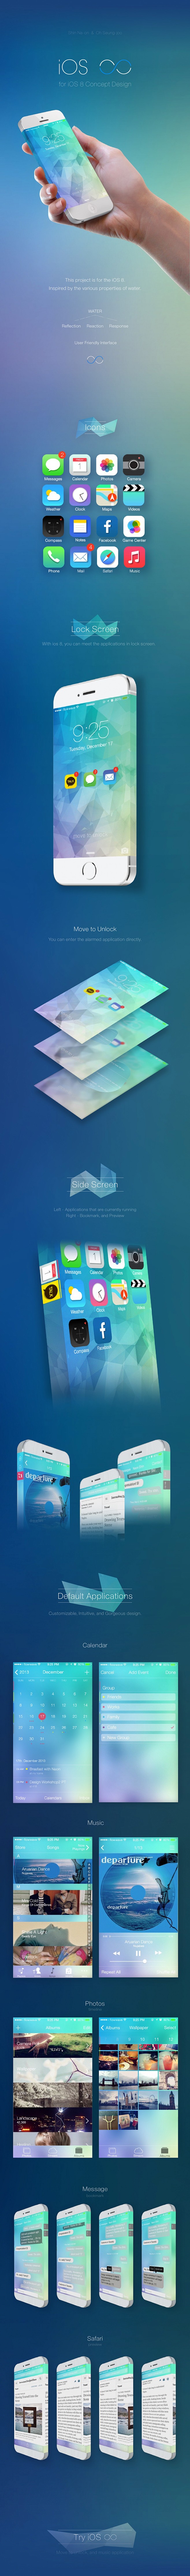 iOS 8 - Infinite by ...